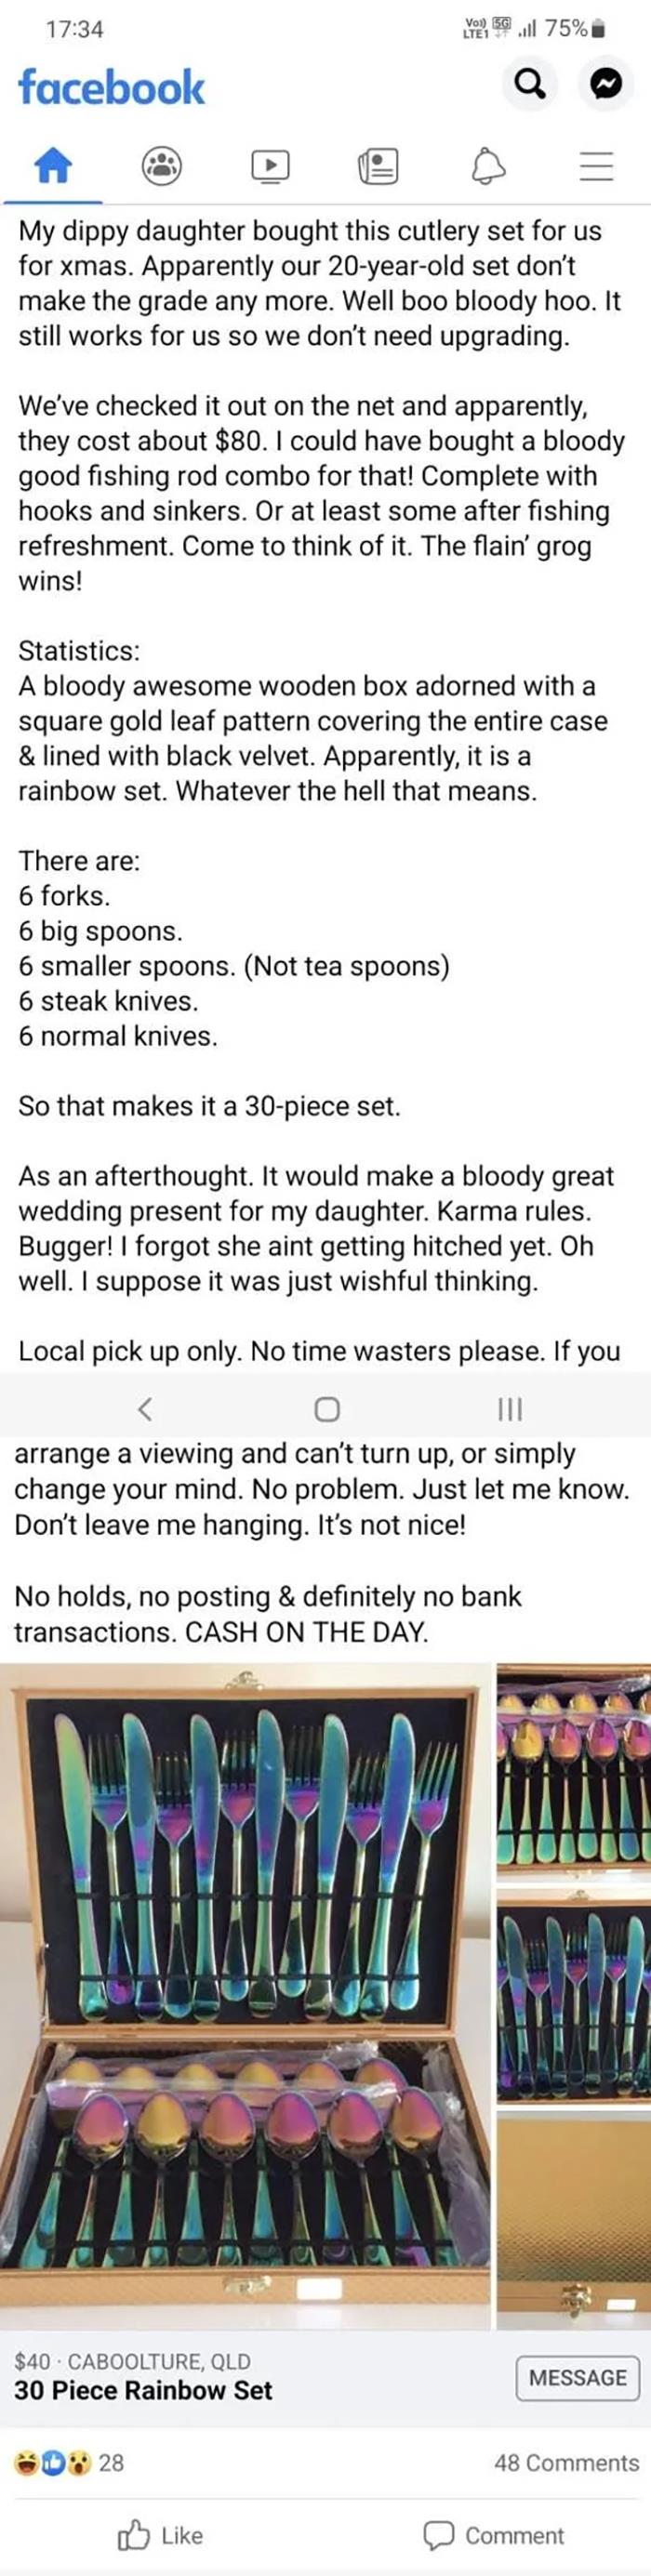 $80 Cutlery Set Not Good Enough For This Father. Proceeds To Roast His Own Daughter